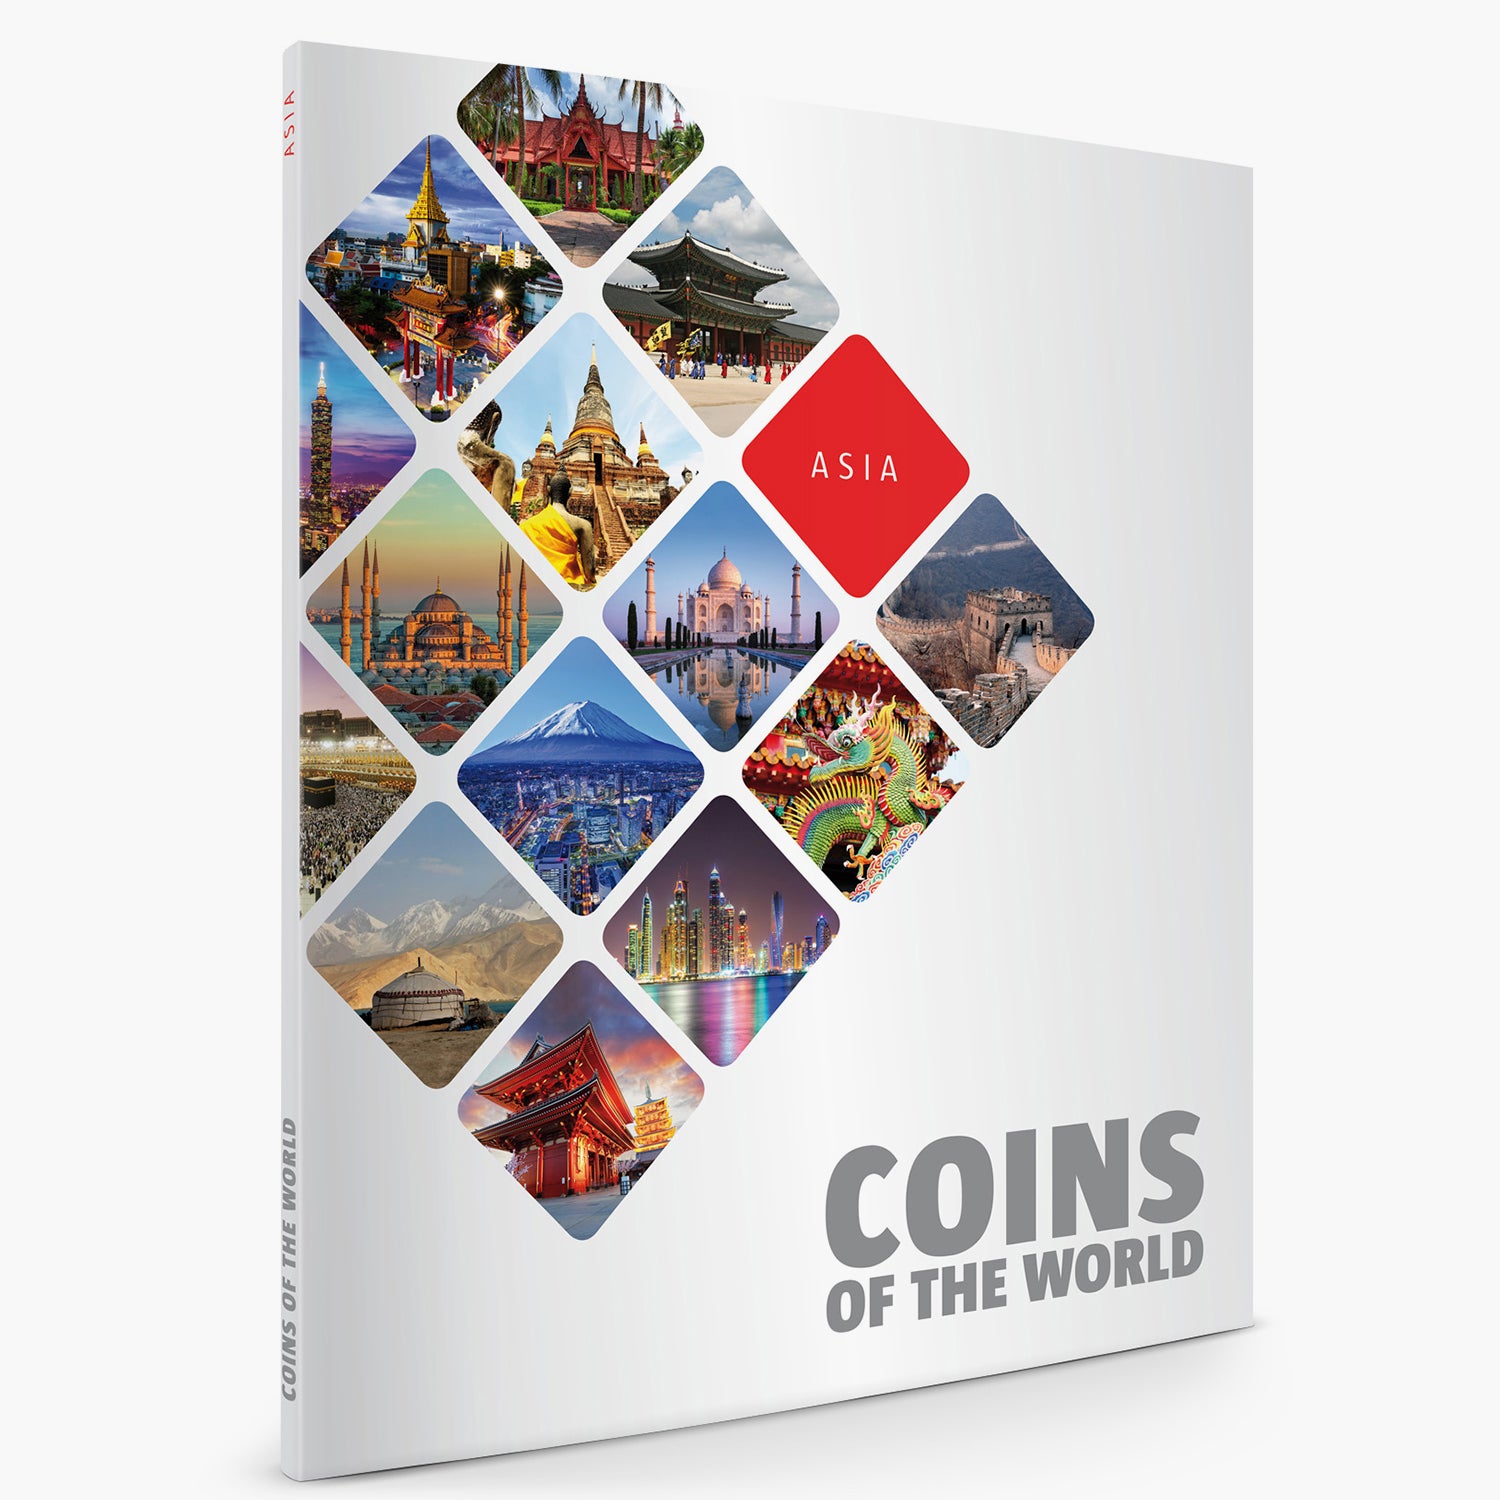 Coins of the World | Asia